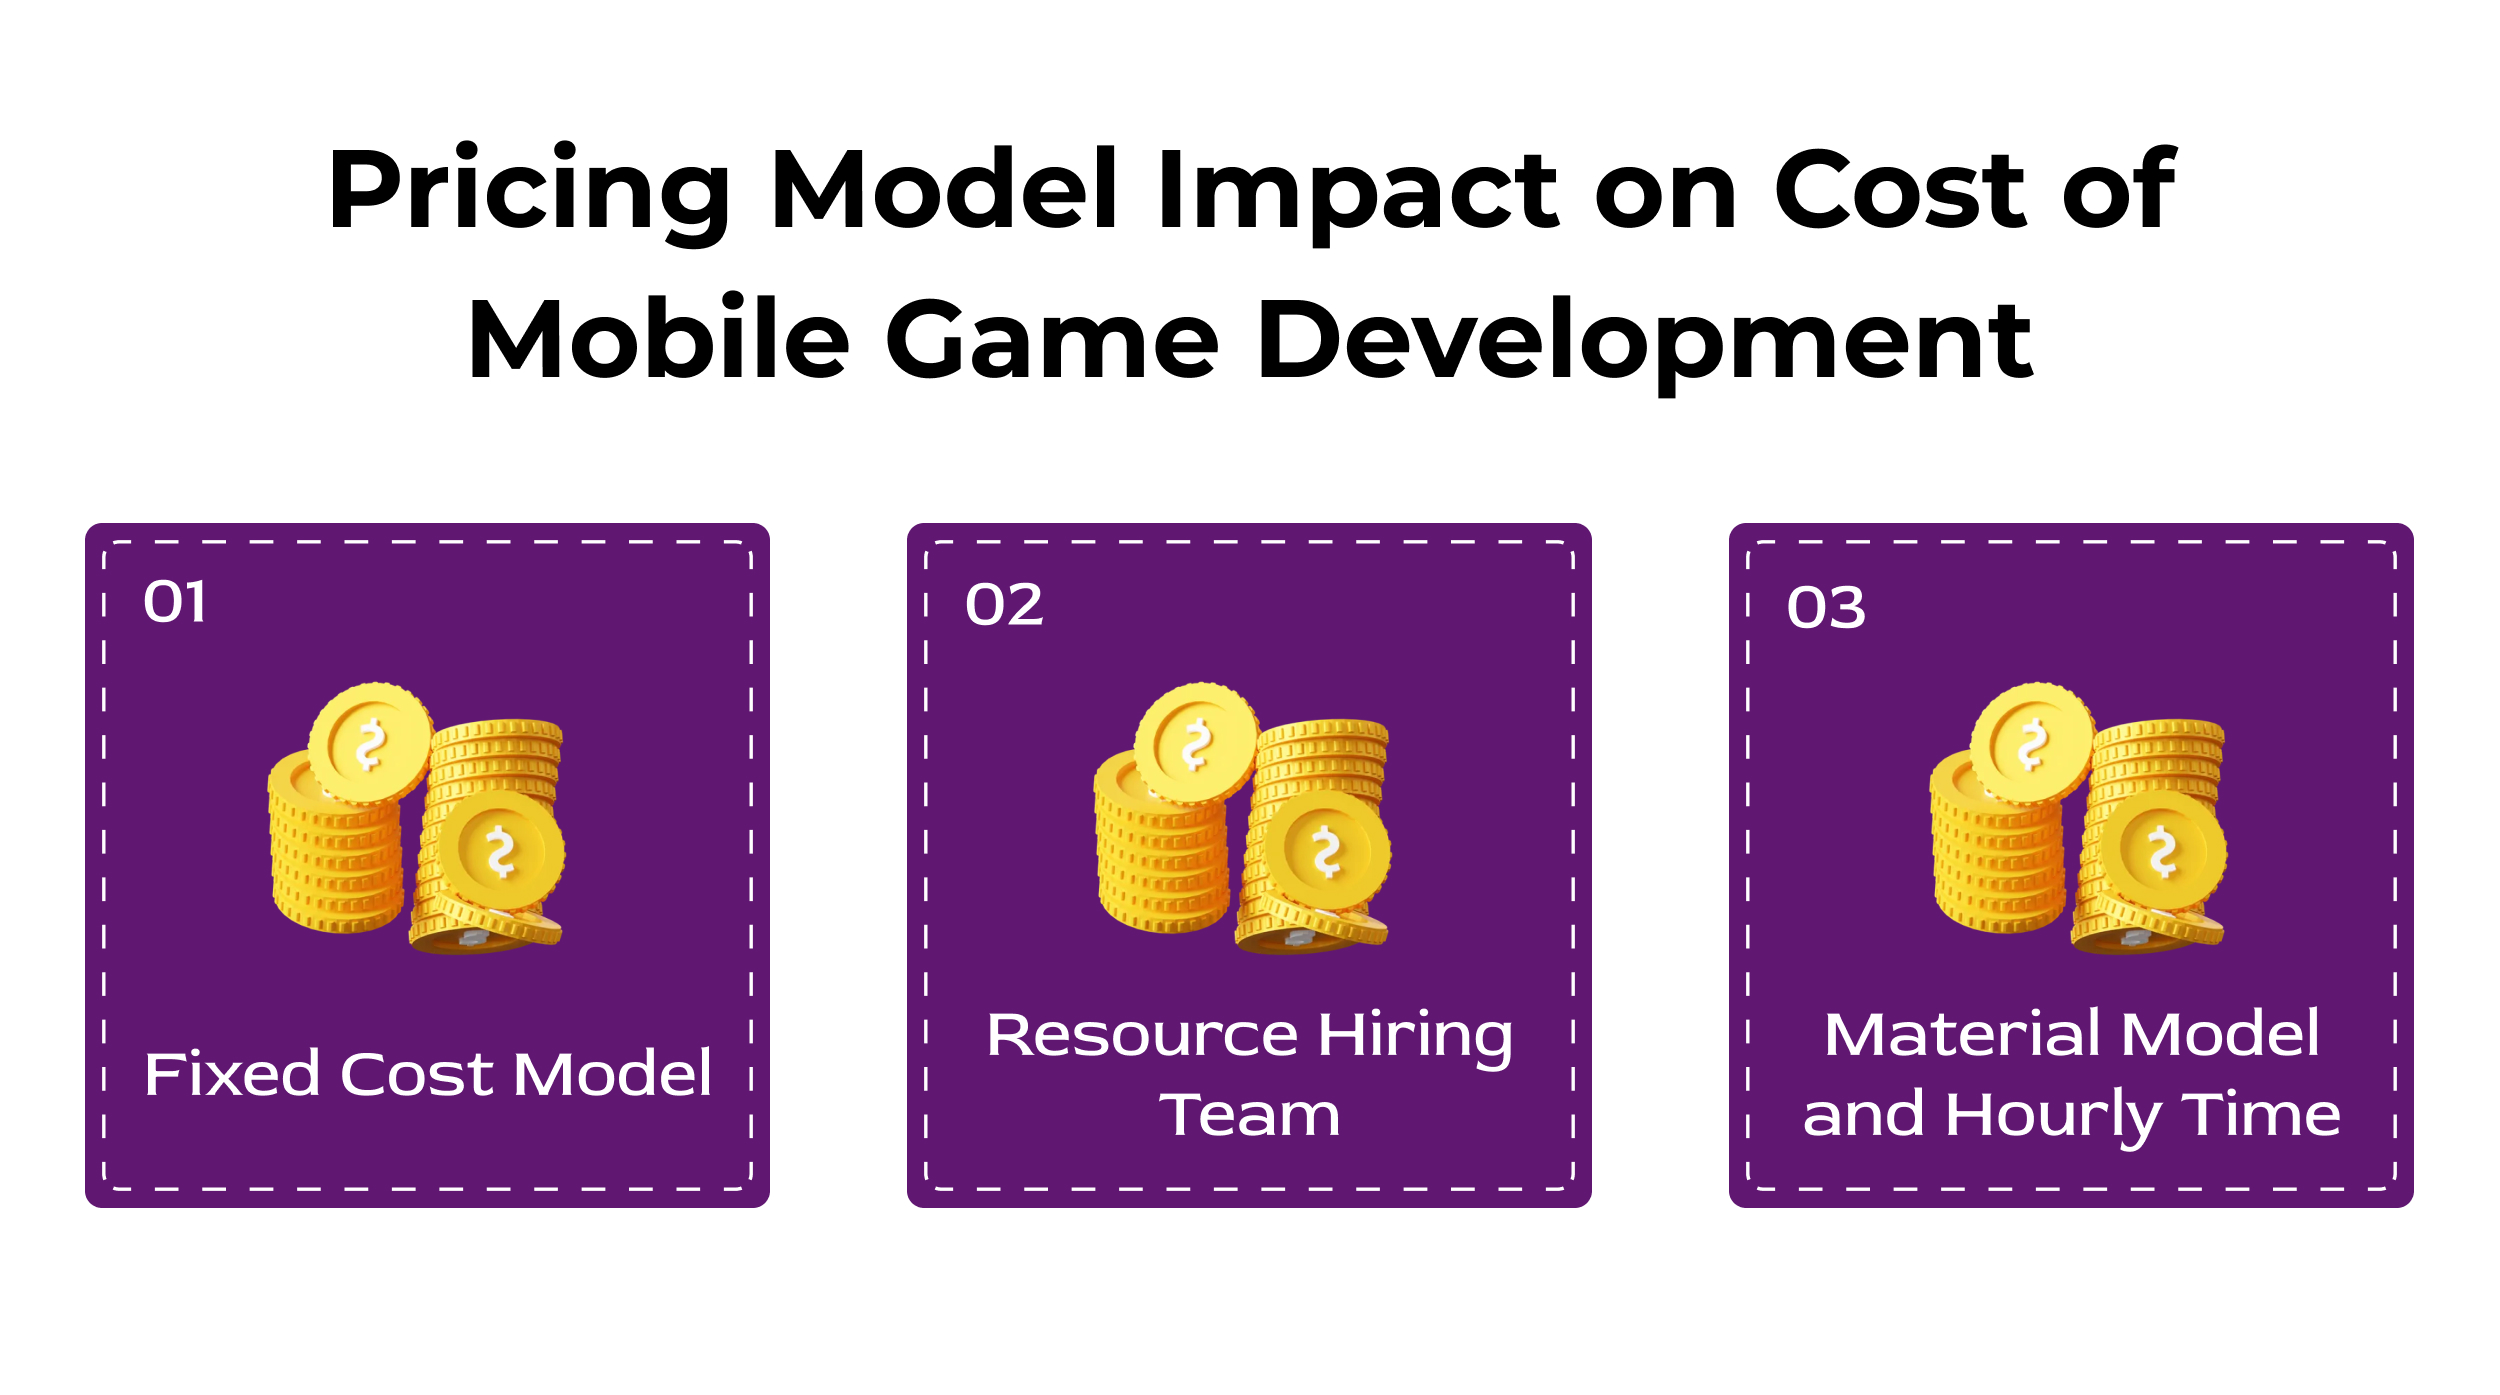 Pricing Model Impact on Cost of Mobile Game Development